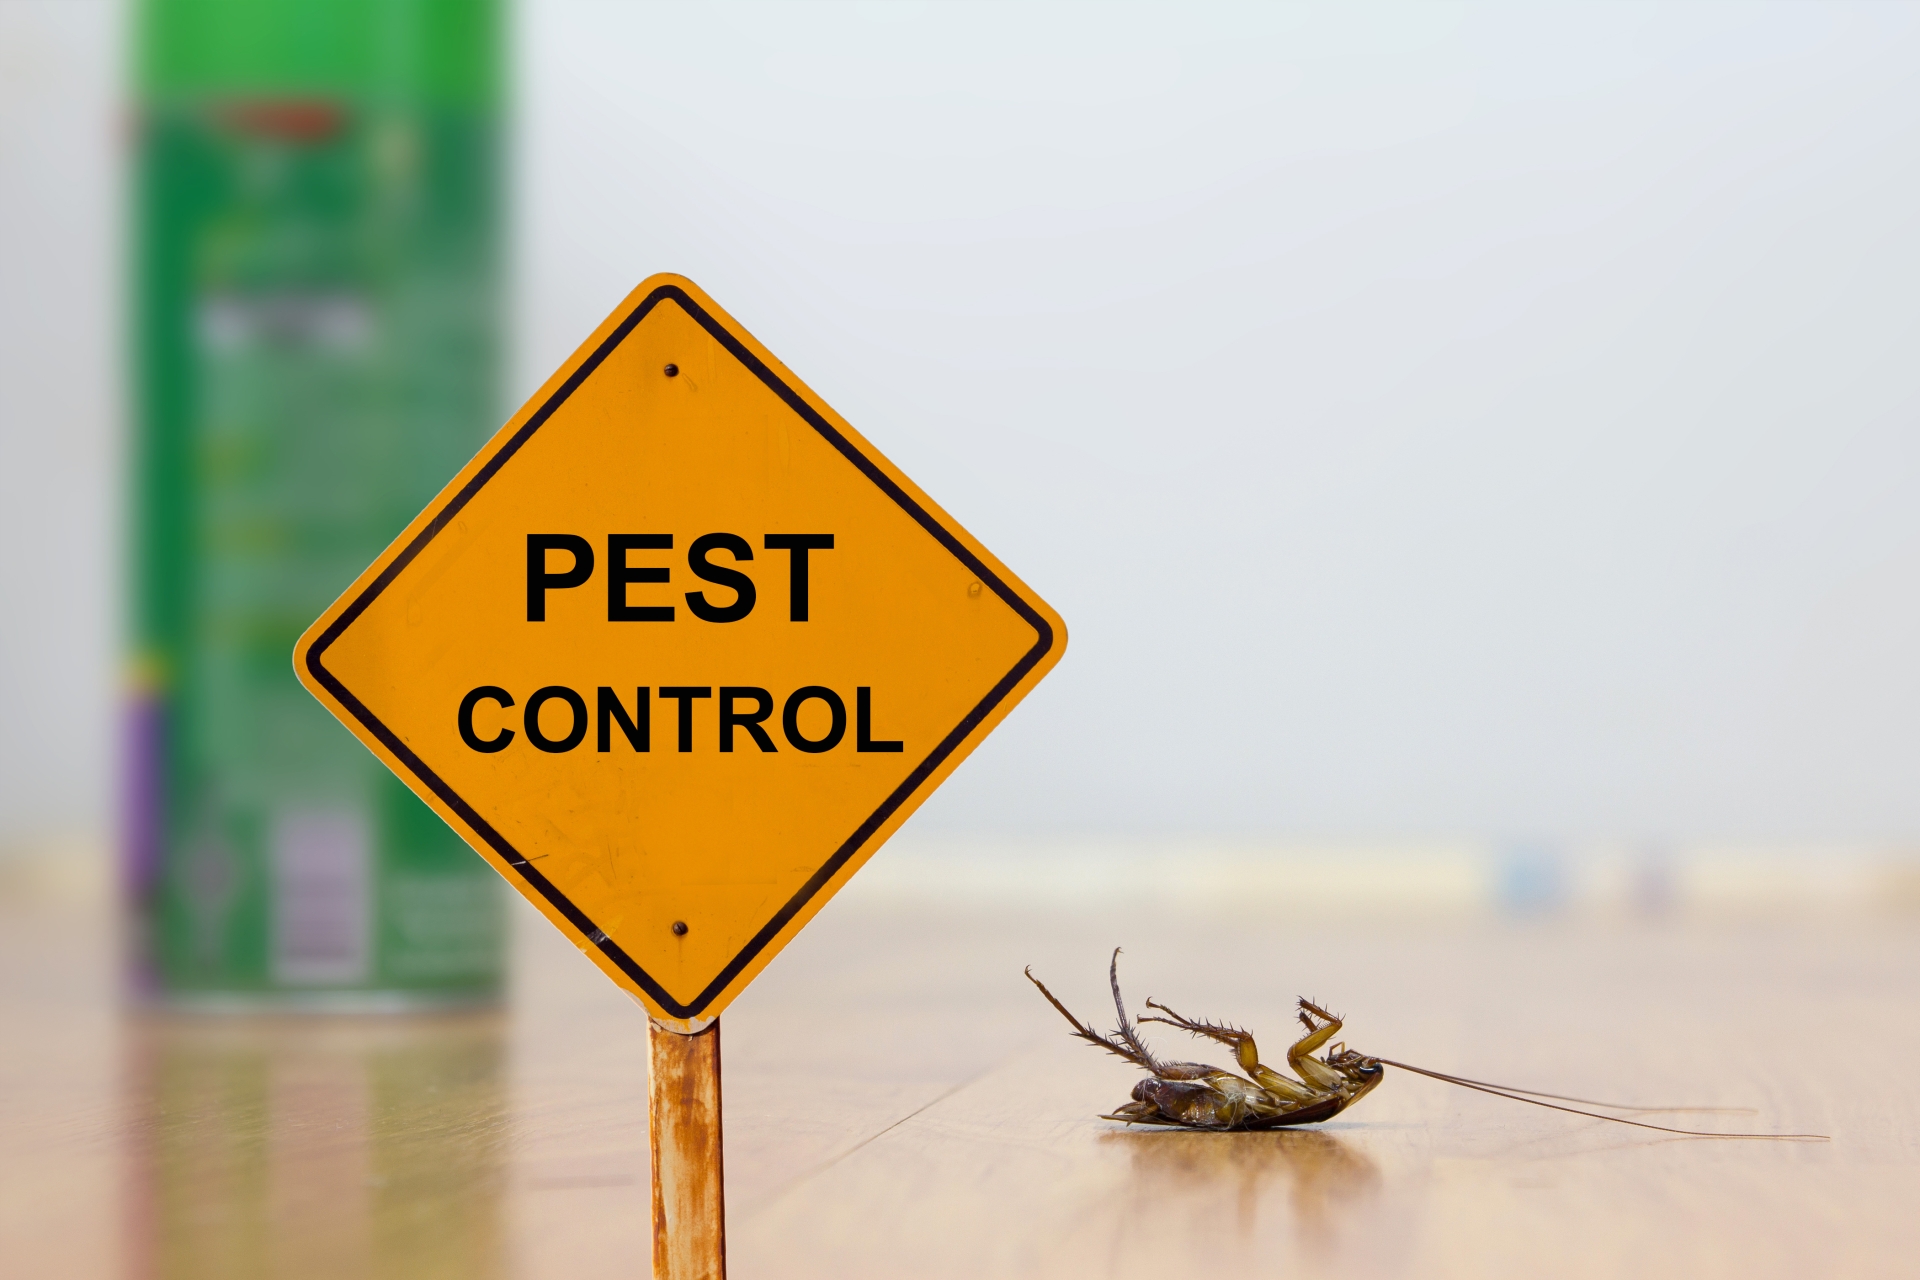 24 Hour Pest Control, Pest Control in Battersea, SW11 . Call Now 020 8166 9746